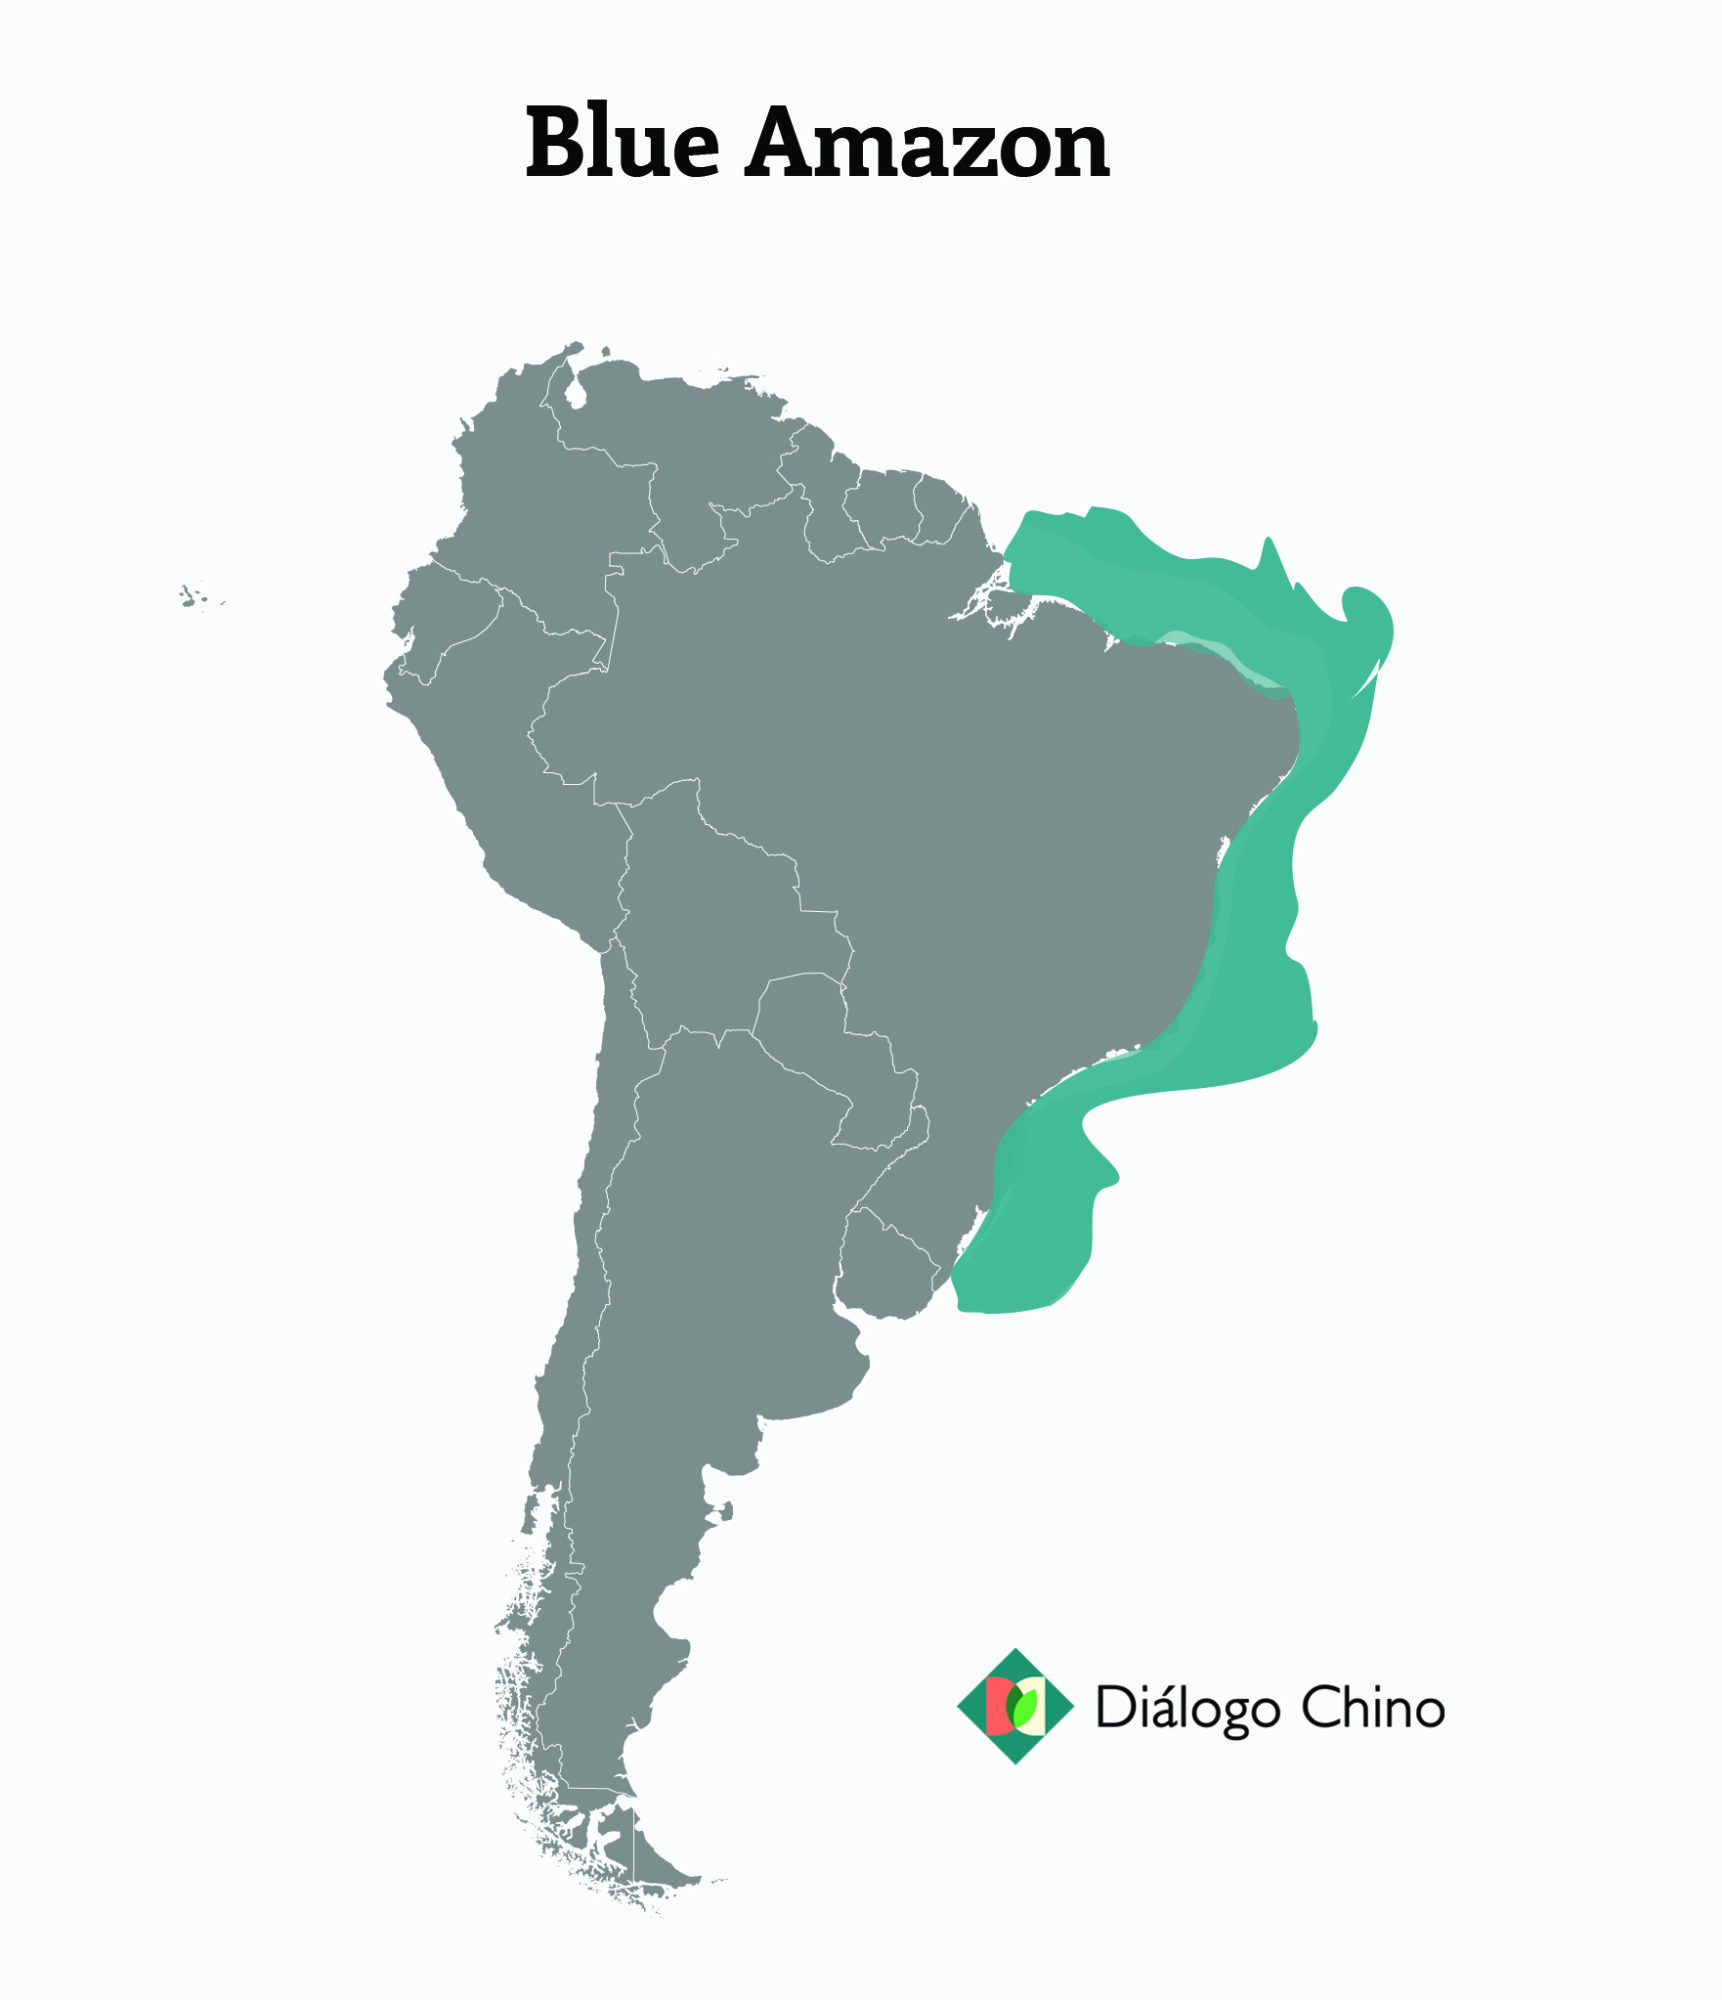 Map of South America with Brazil's Blue Amazon exclusive economic zone highlighted